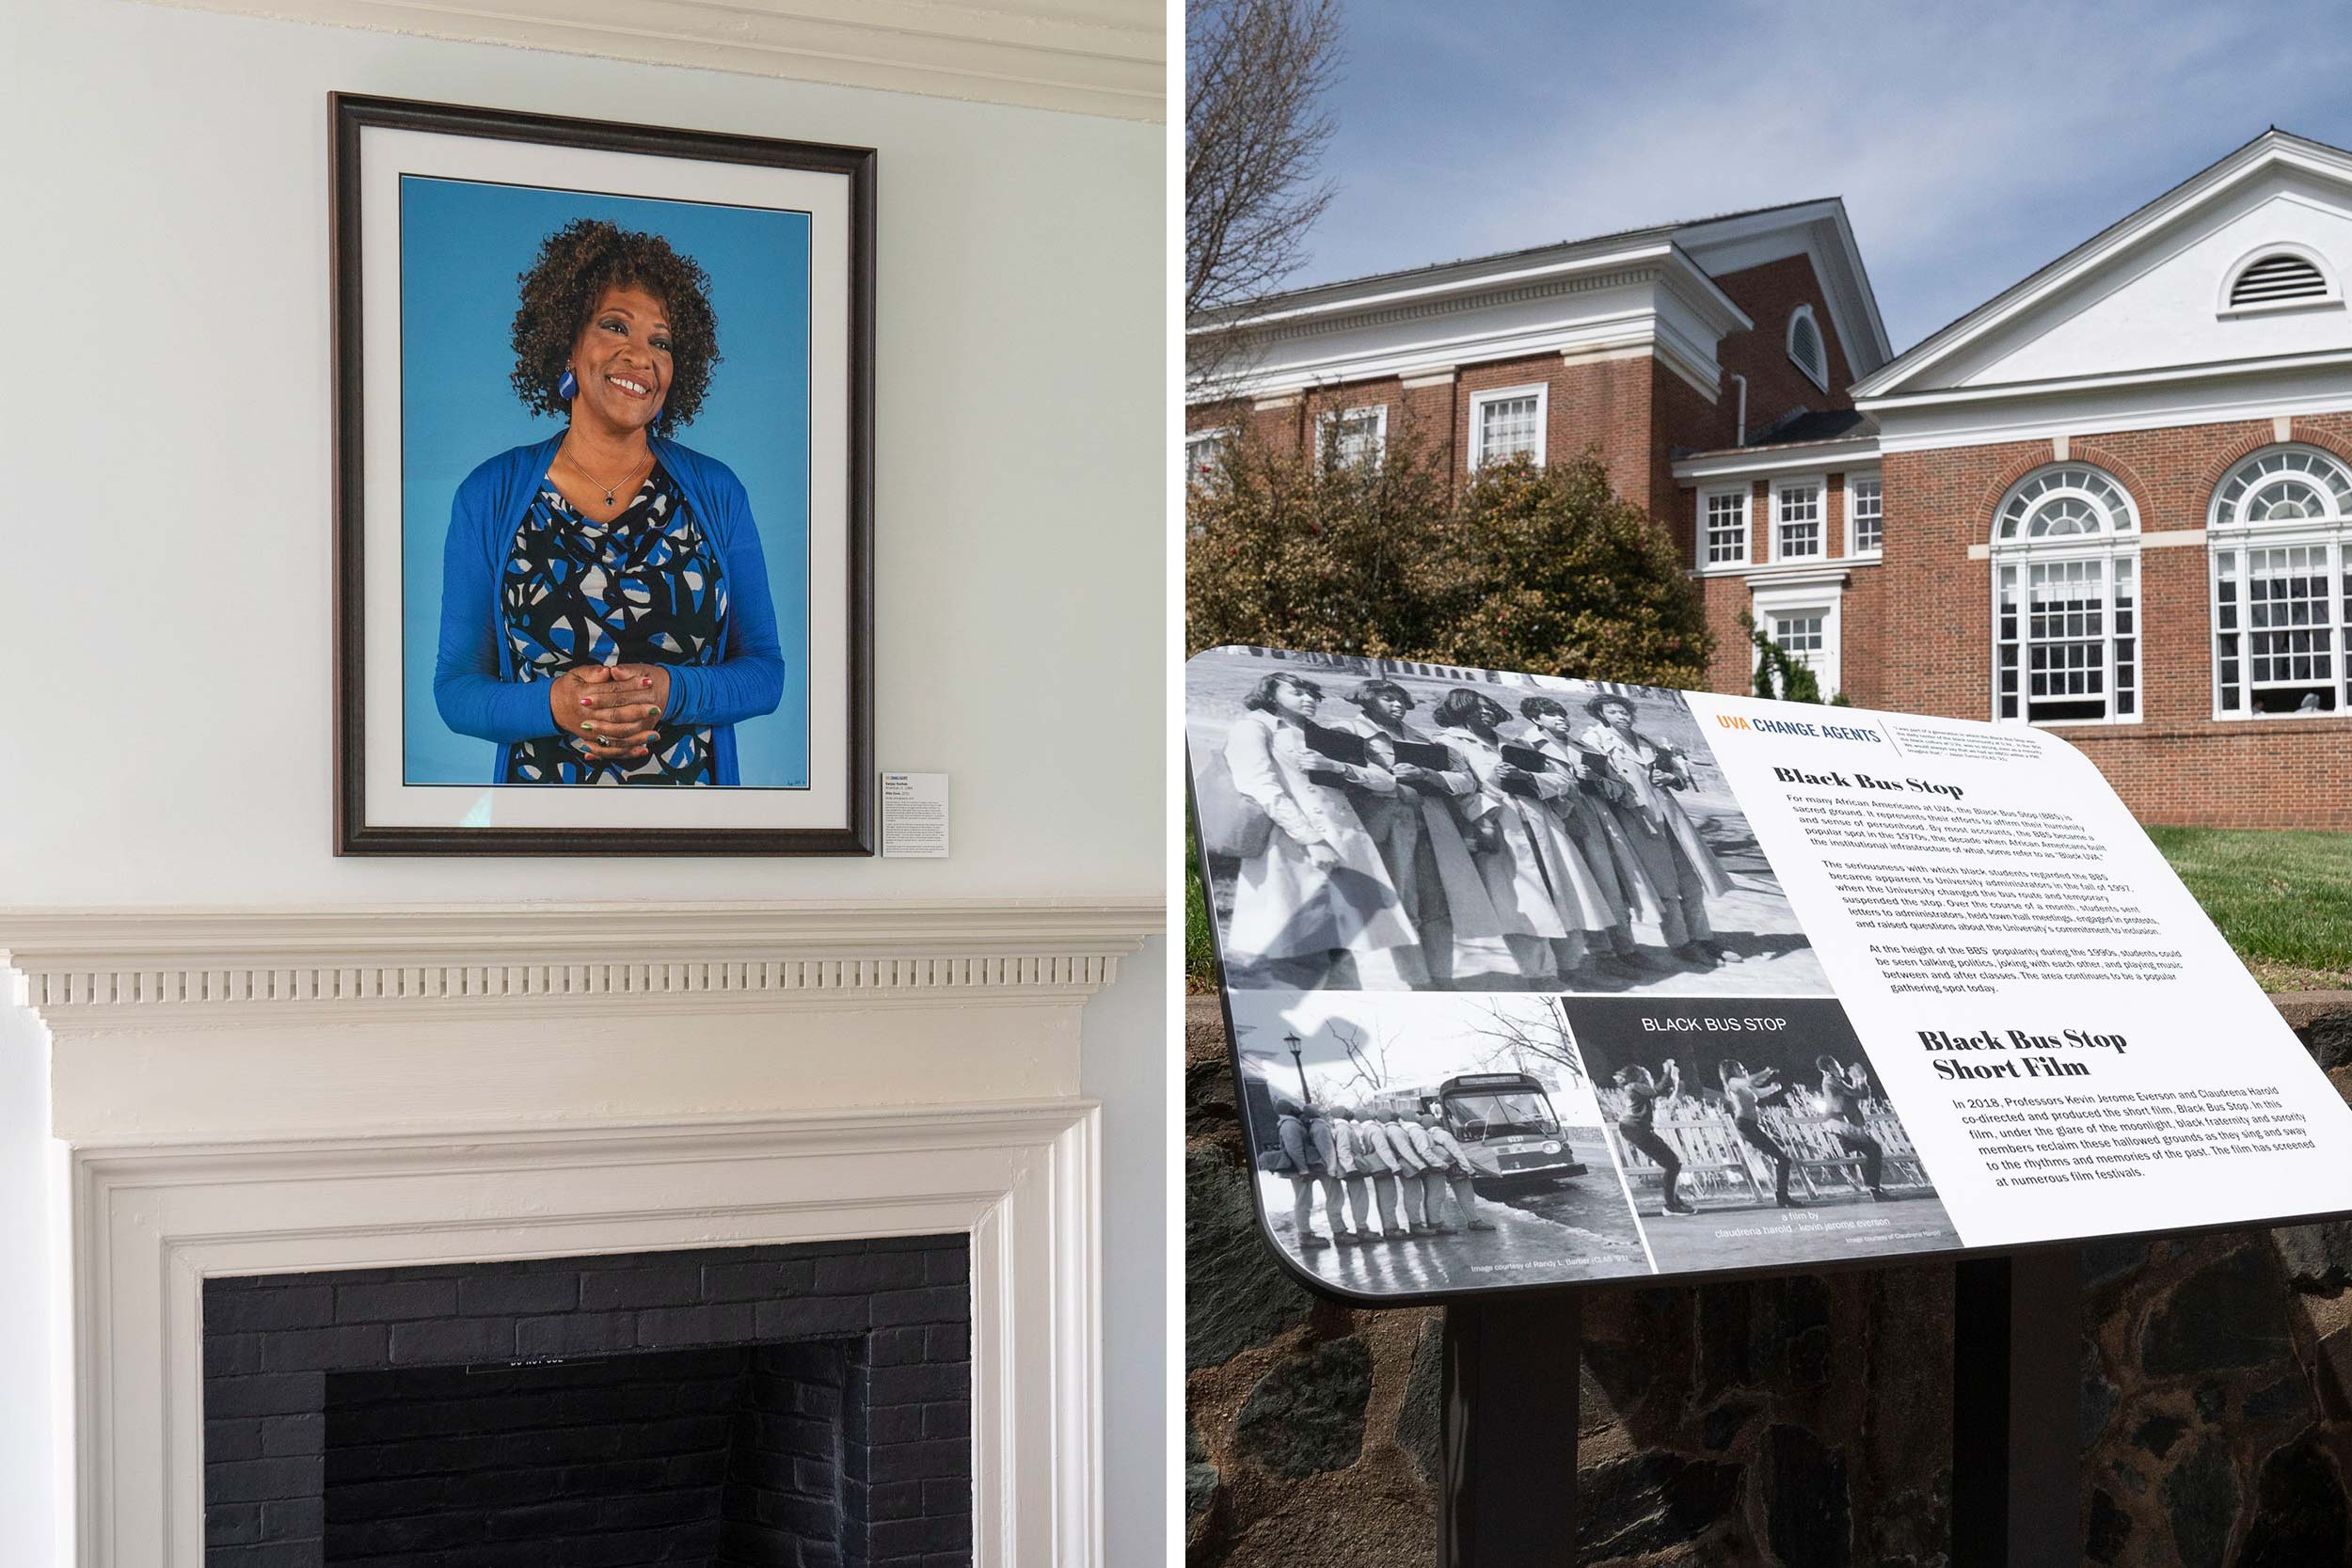 UVA Adds Dove Portrait and Bus Stop Marker to Honor Recent History